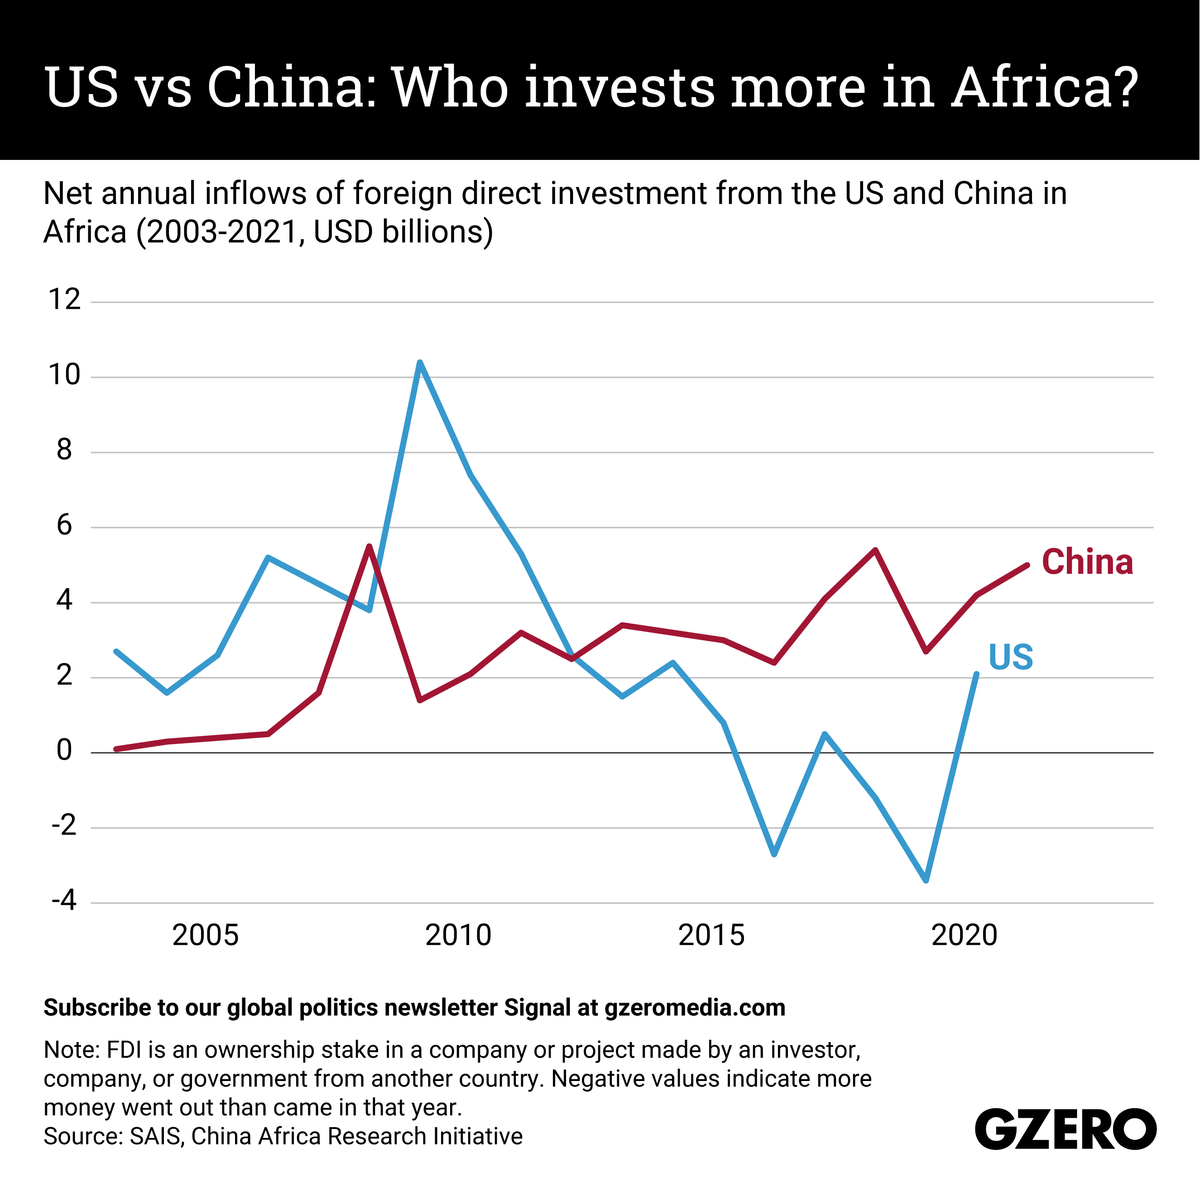 Line chart showing net FDI flows from the US and China to Africa since 2003.